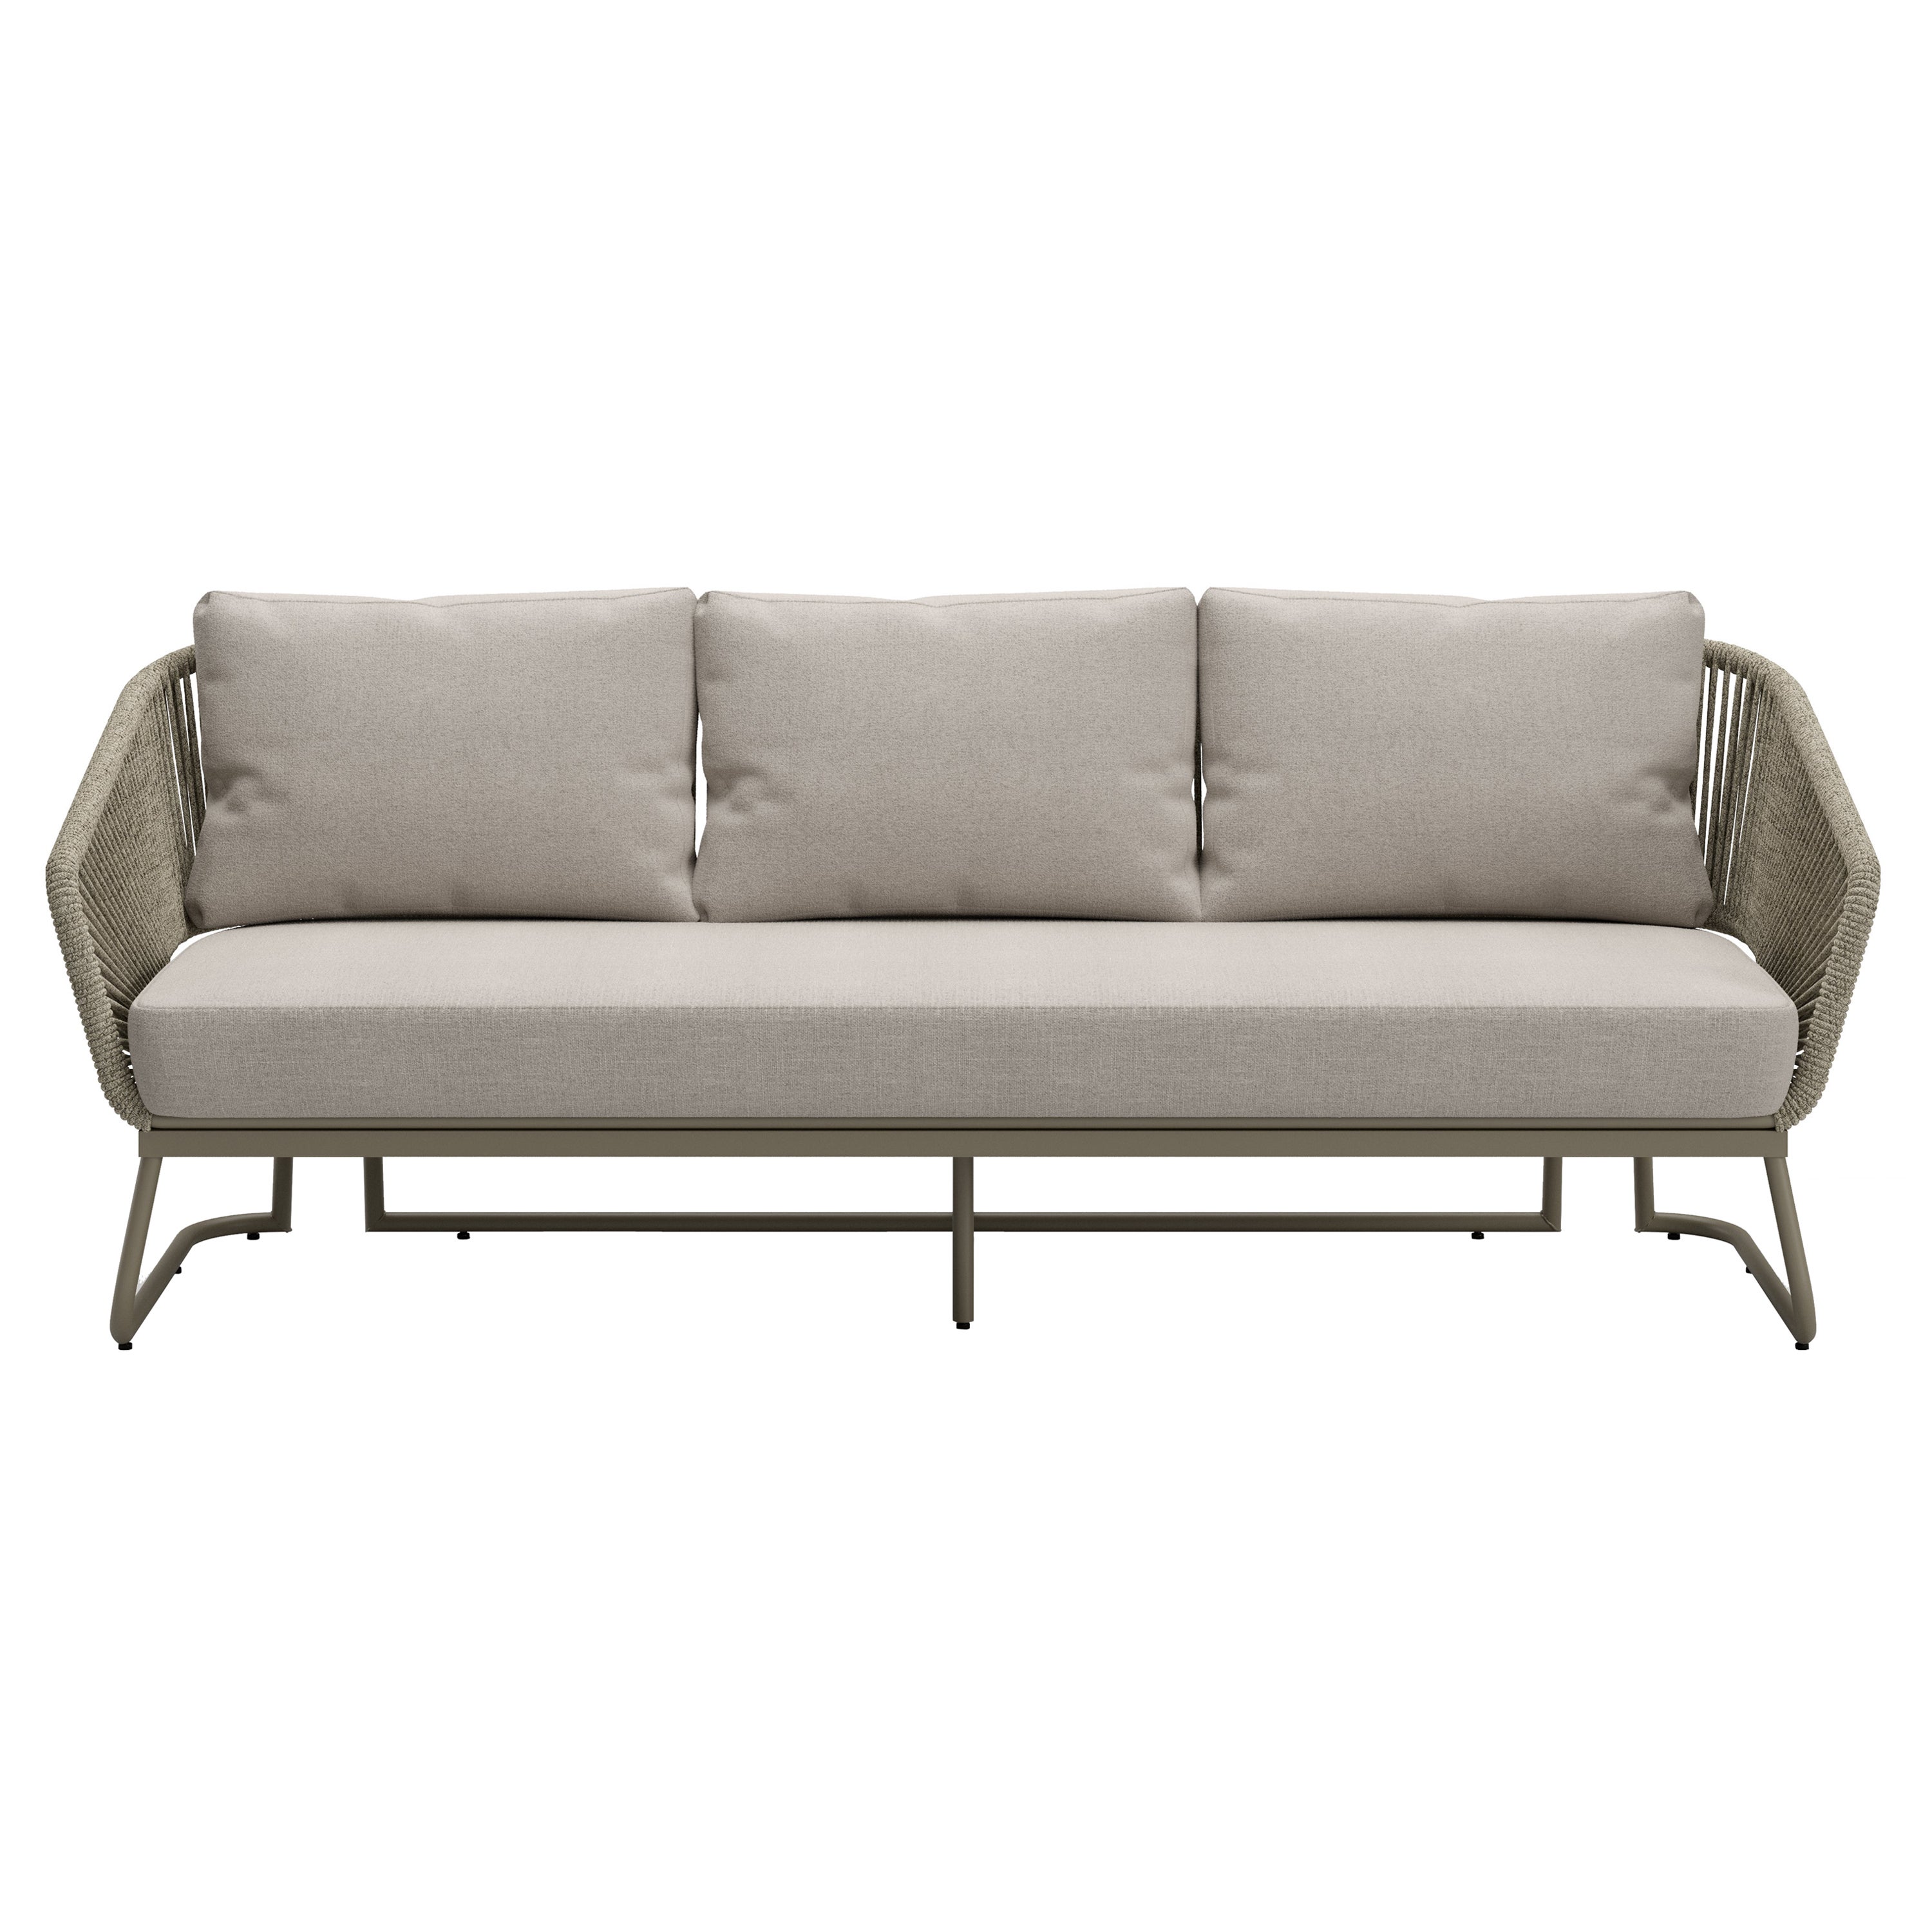 Claude Outdoor 3 Seater Sofa by Snoc